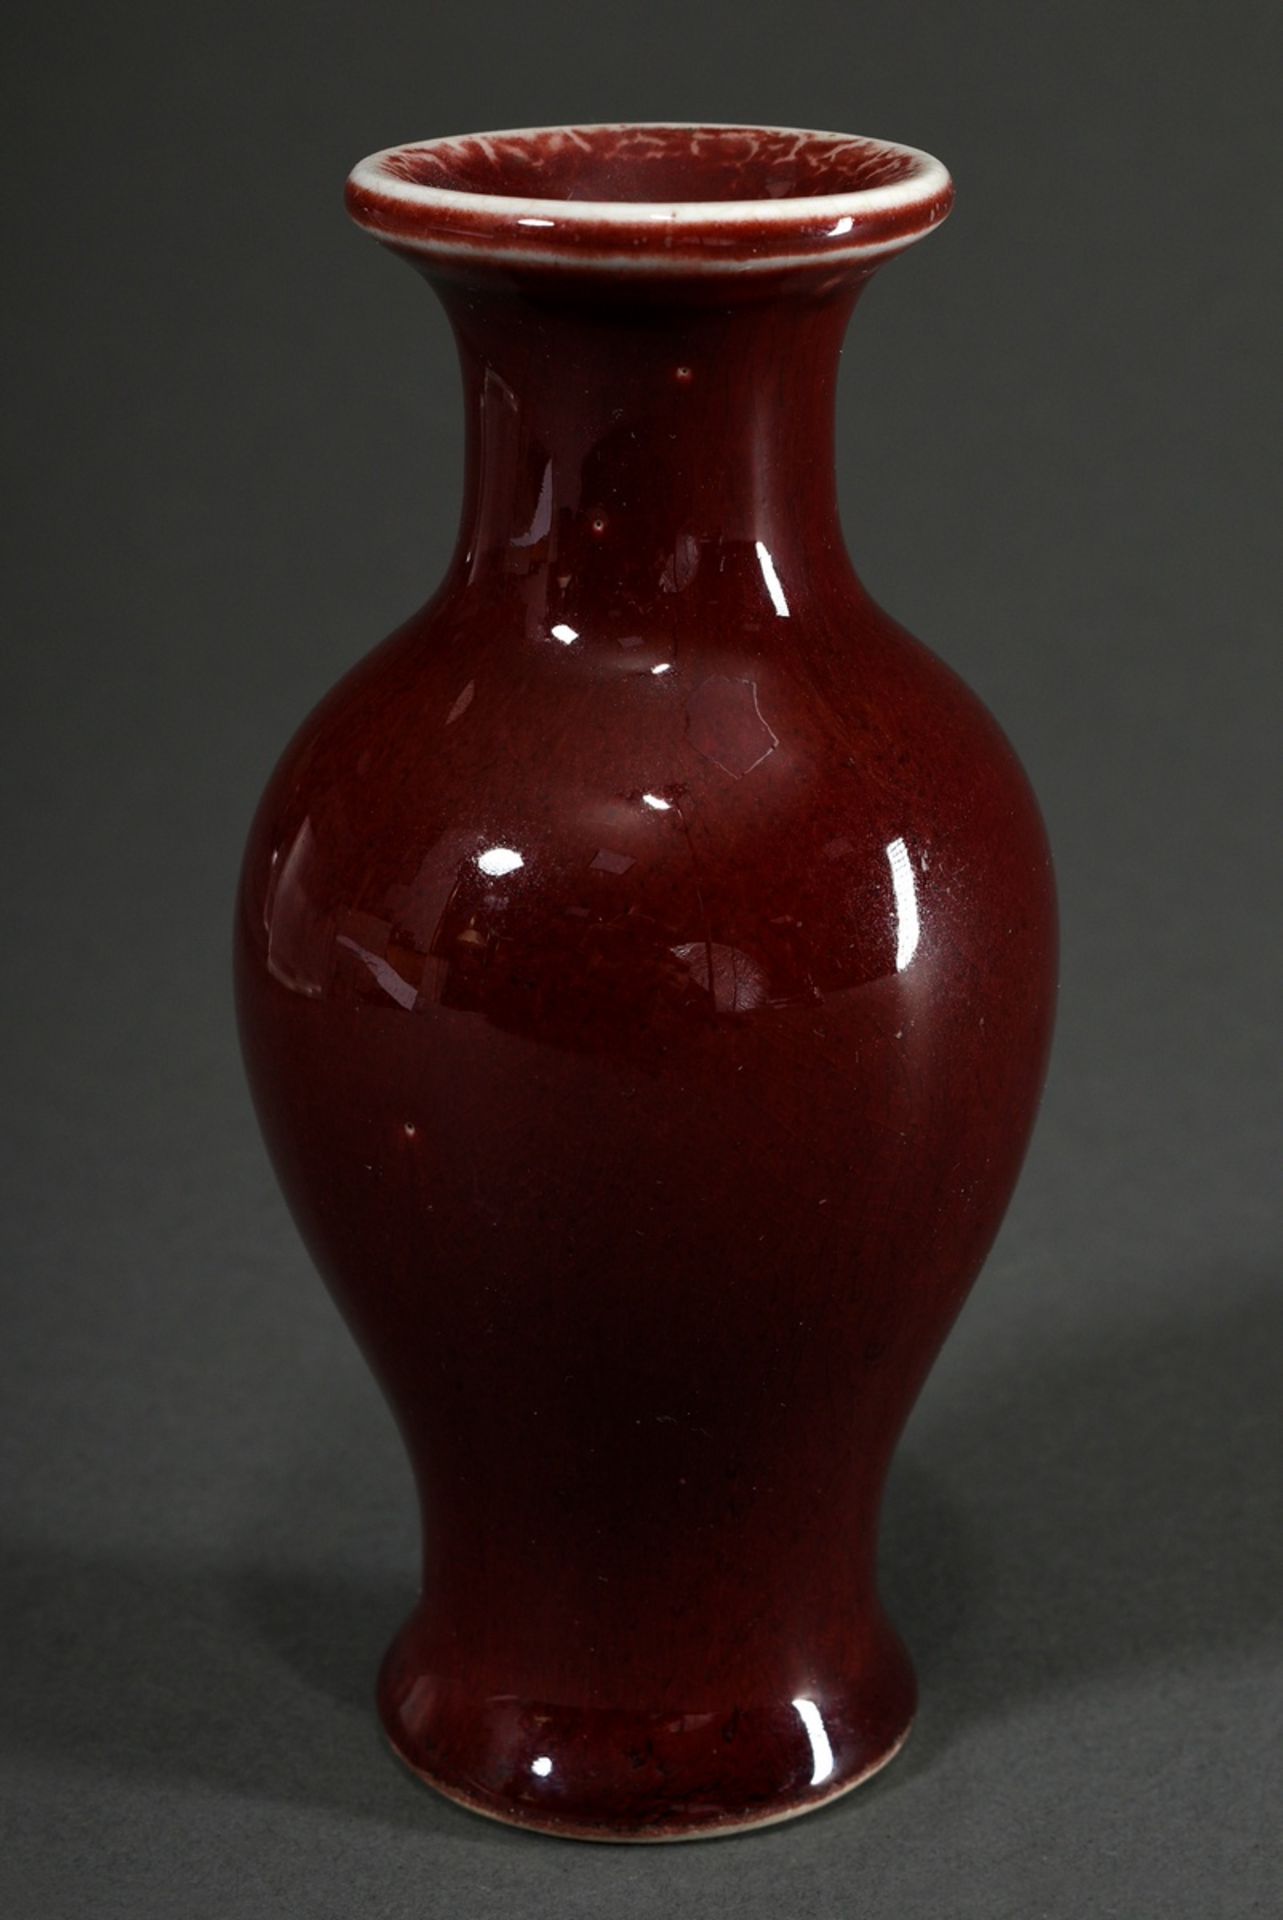 Small porcelain baluster vase in dark copper red "Jihong" with underglazed blue 4-character hall ma